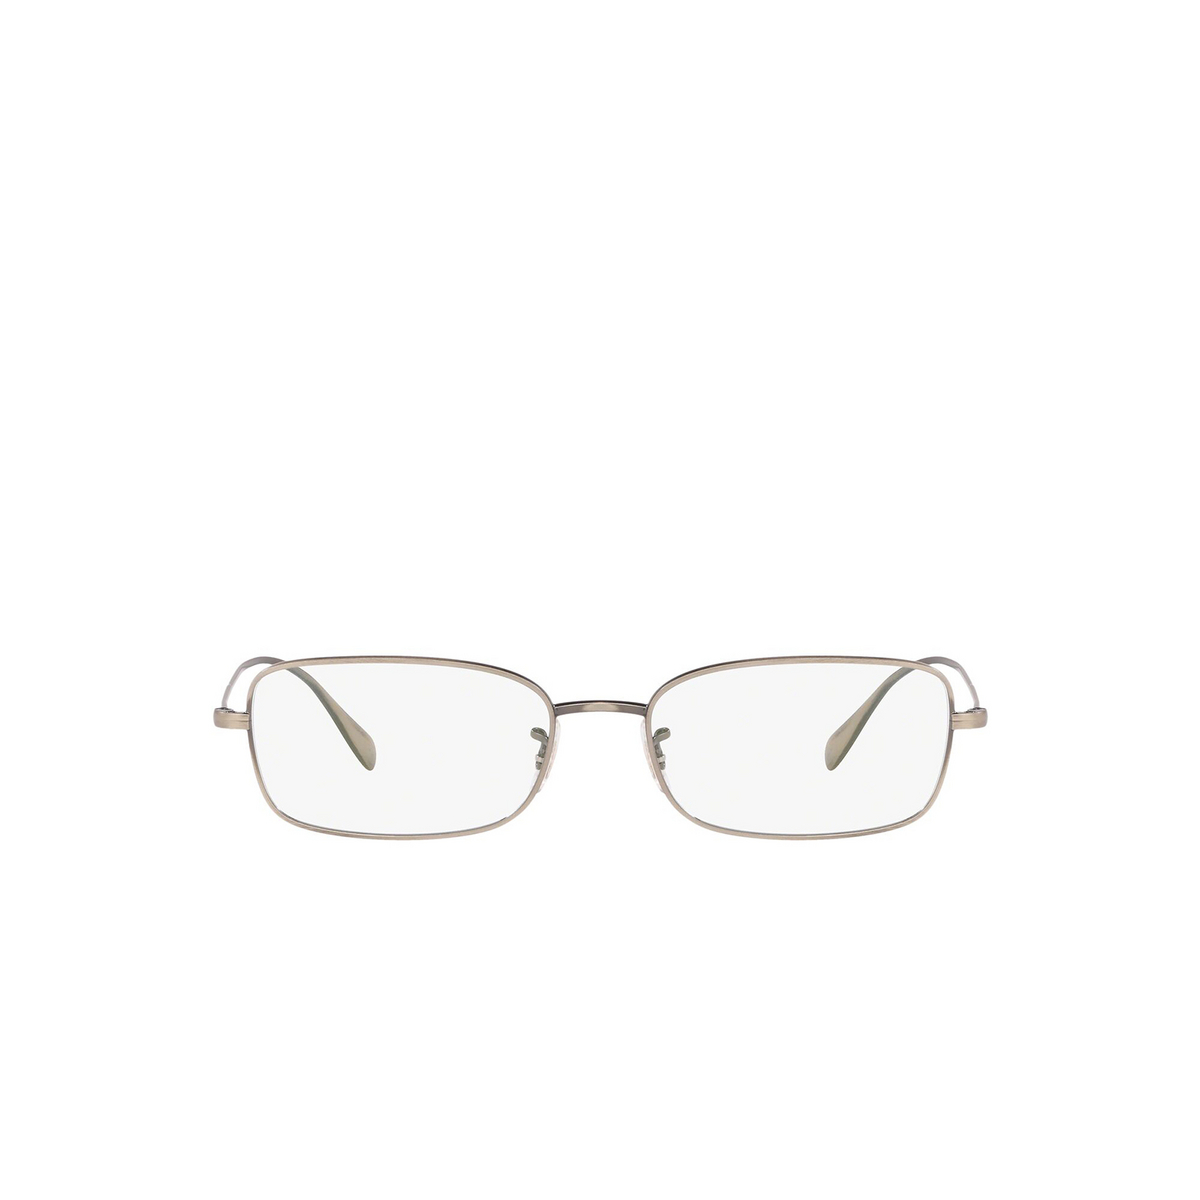 Oliver Peoples® Rectangle Eyeglasses: Aronson OV1253 color New Antique Pewter 5289 - front view.